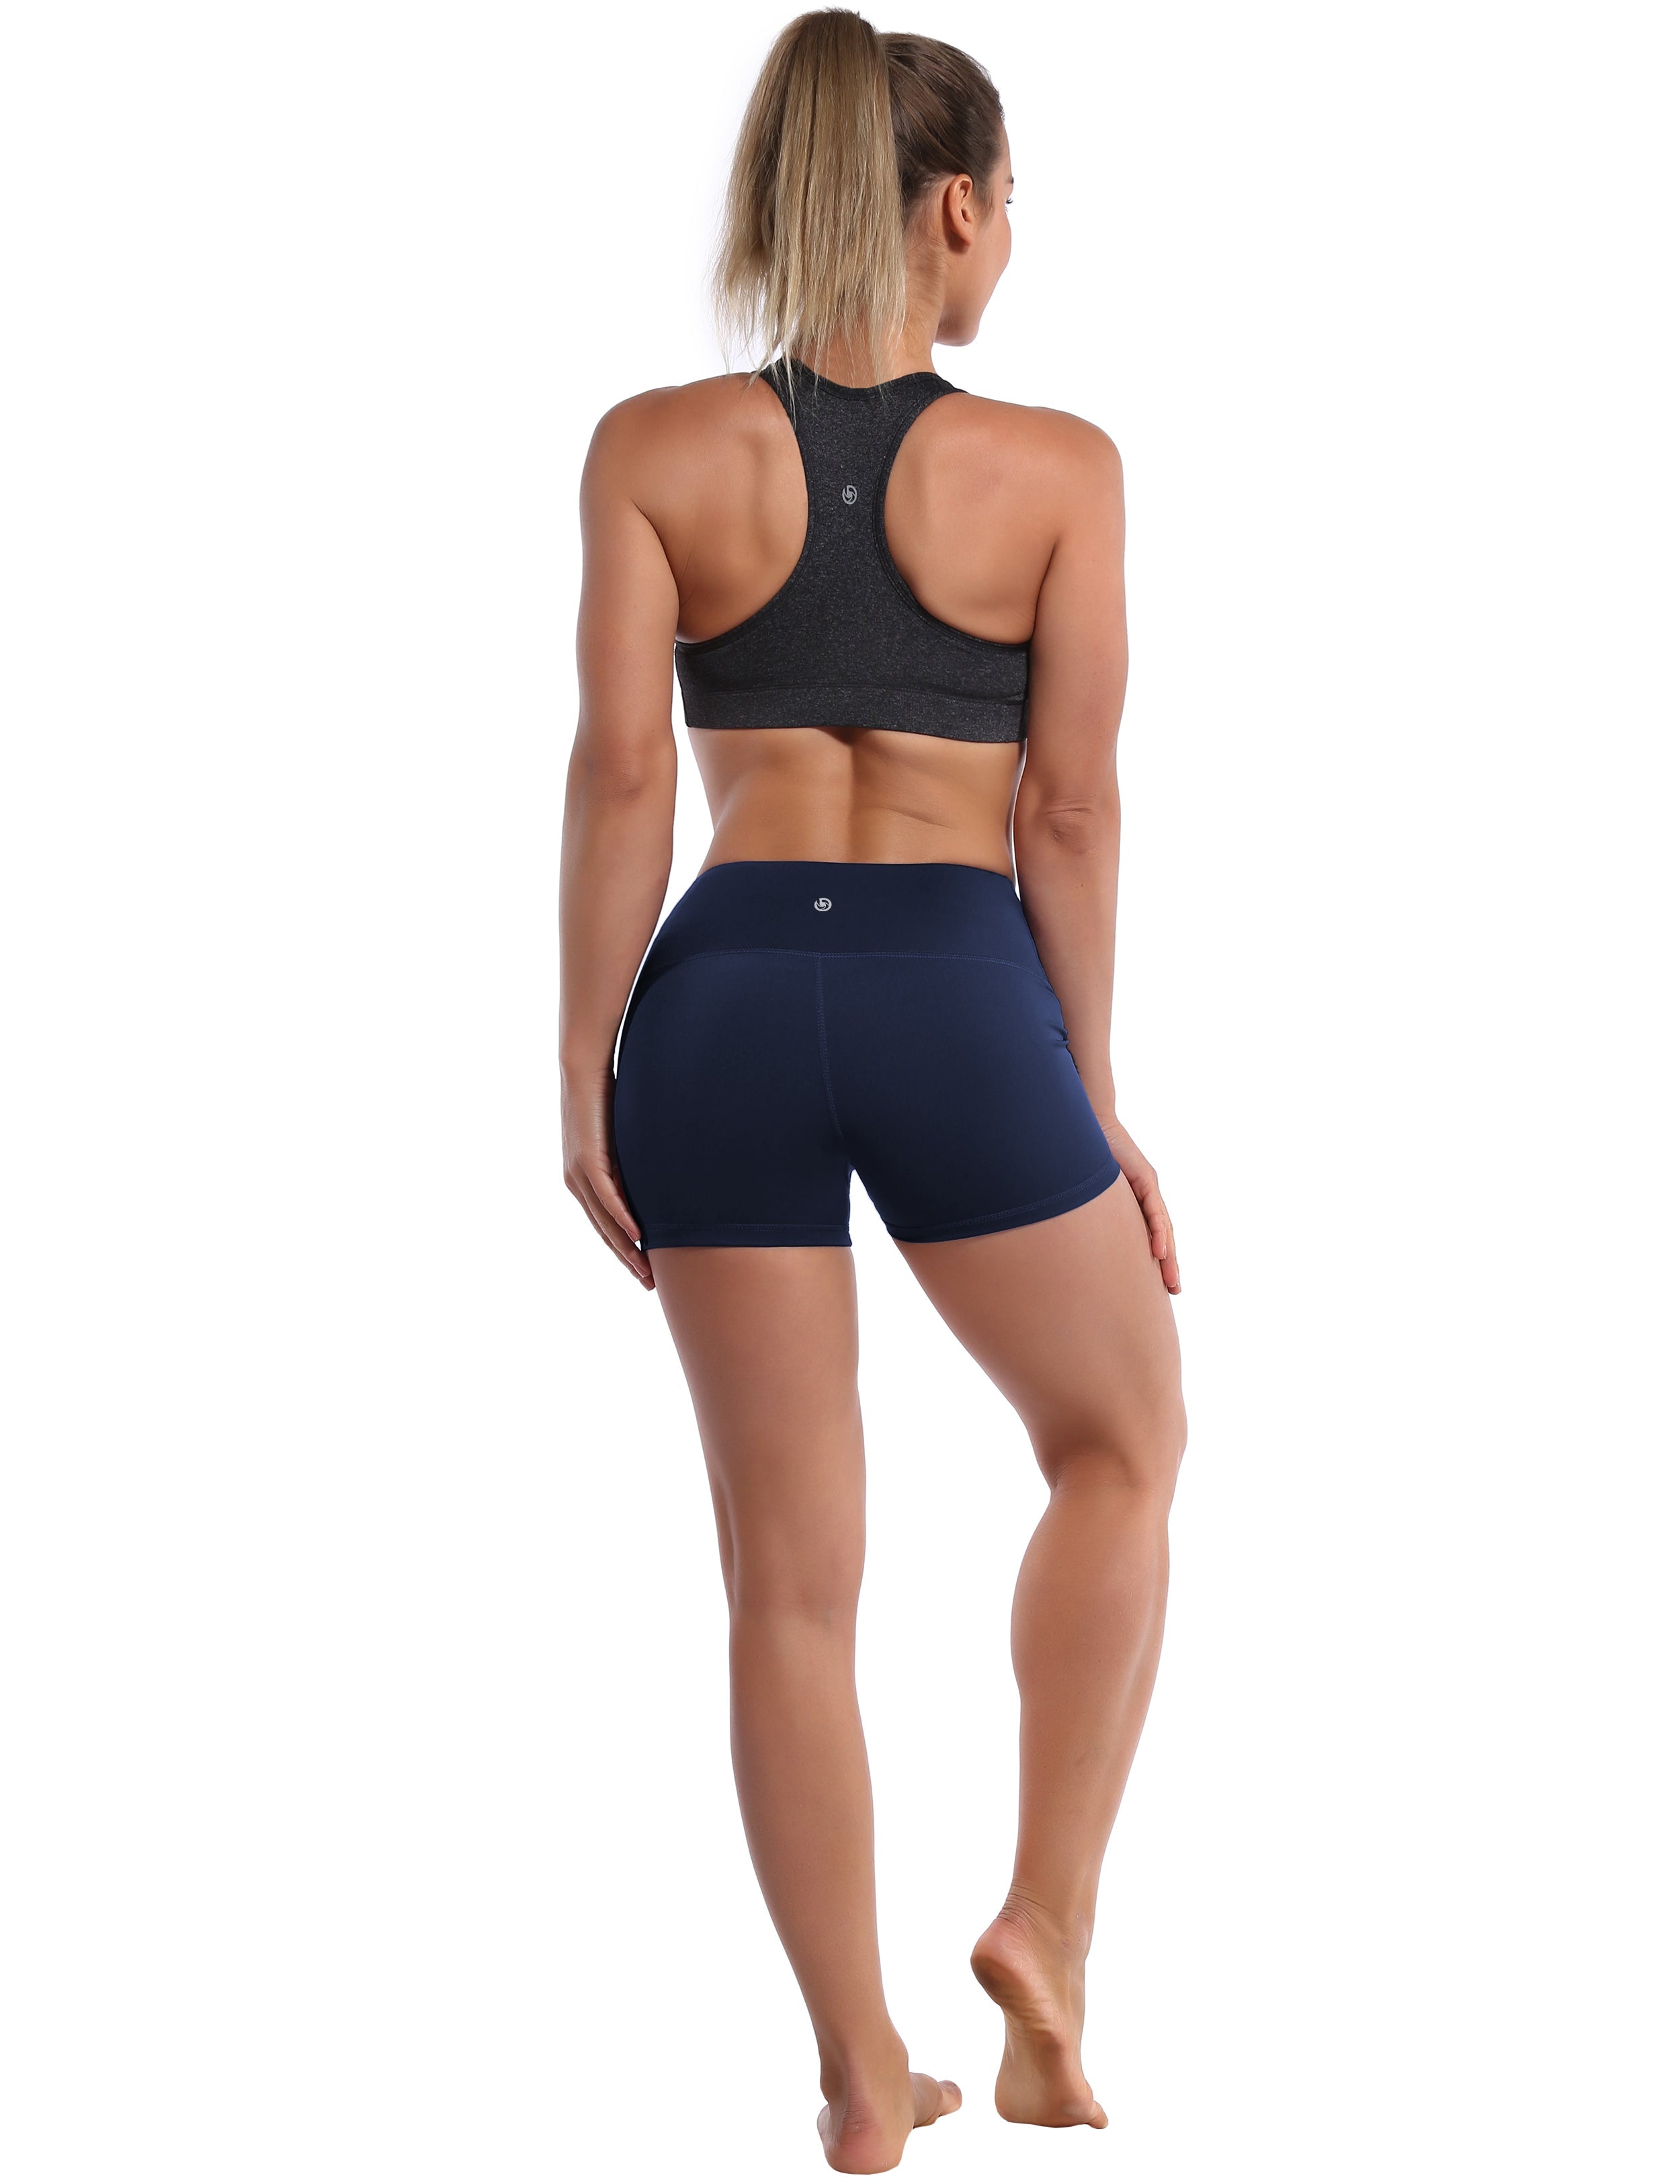 2.5" Biking Shorts darknavy Softest-ever fabric High elasticity High density 4-way stretch Fabric doesn't attract lint easily No see-through Moisture-wicking Machine wash 75% Nylon, 25% Spandex